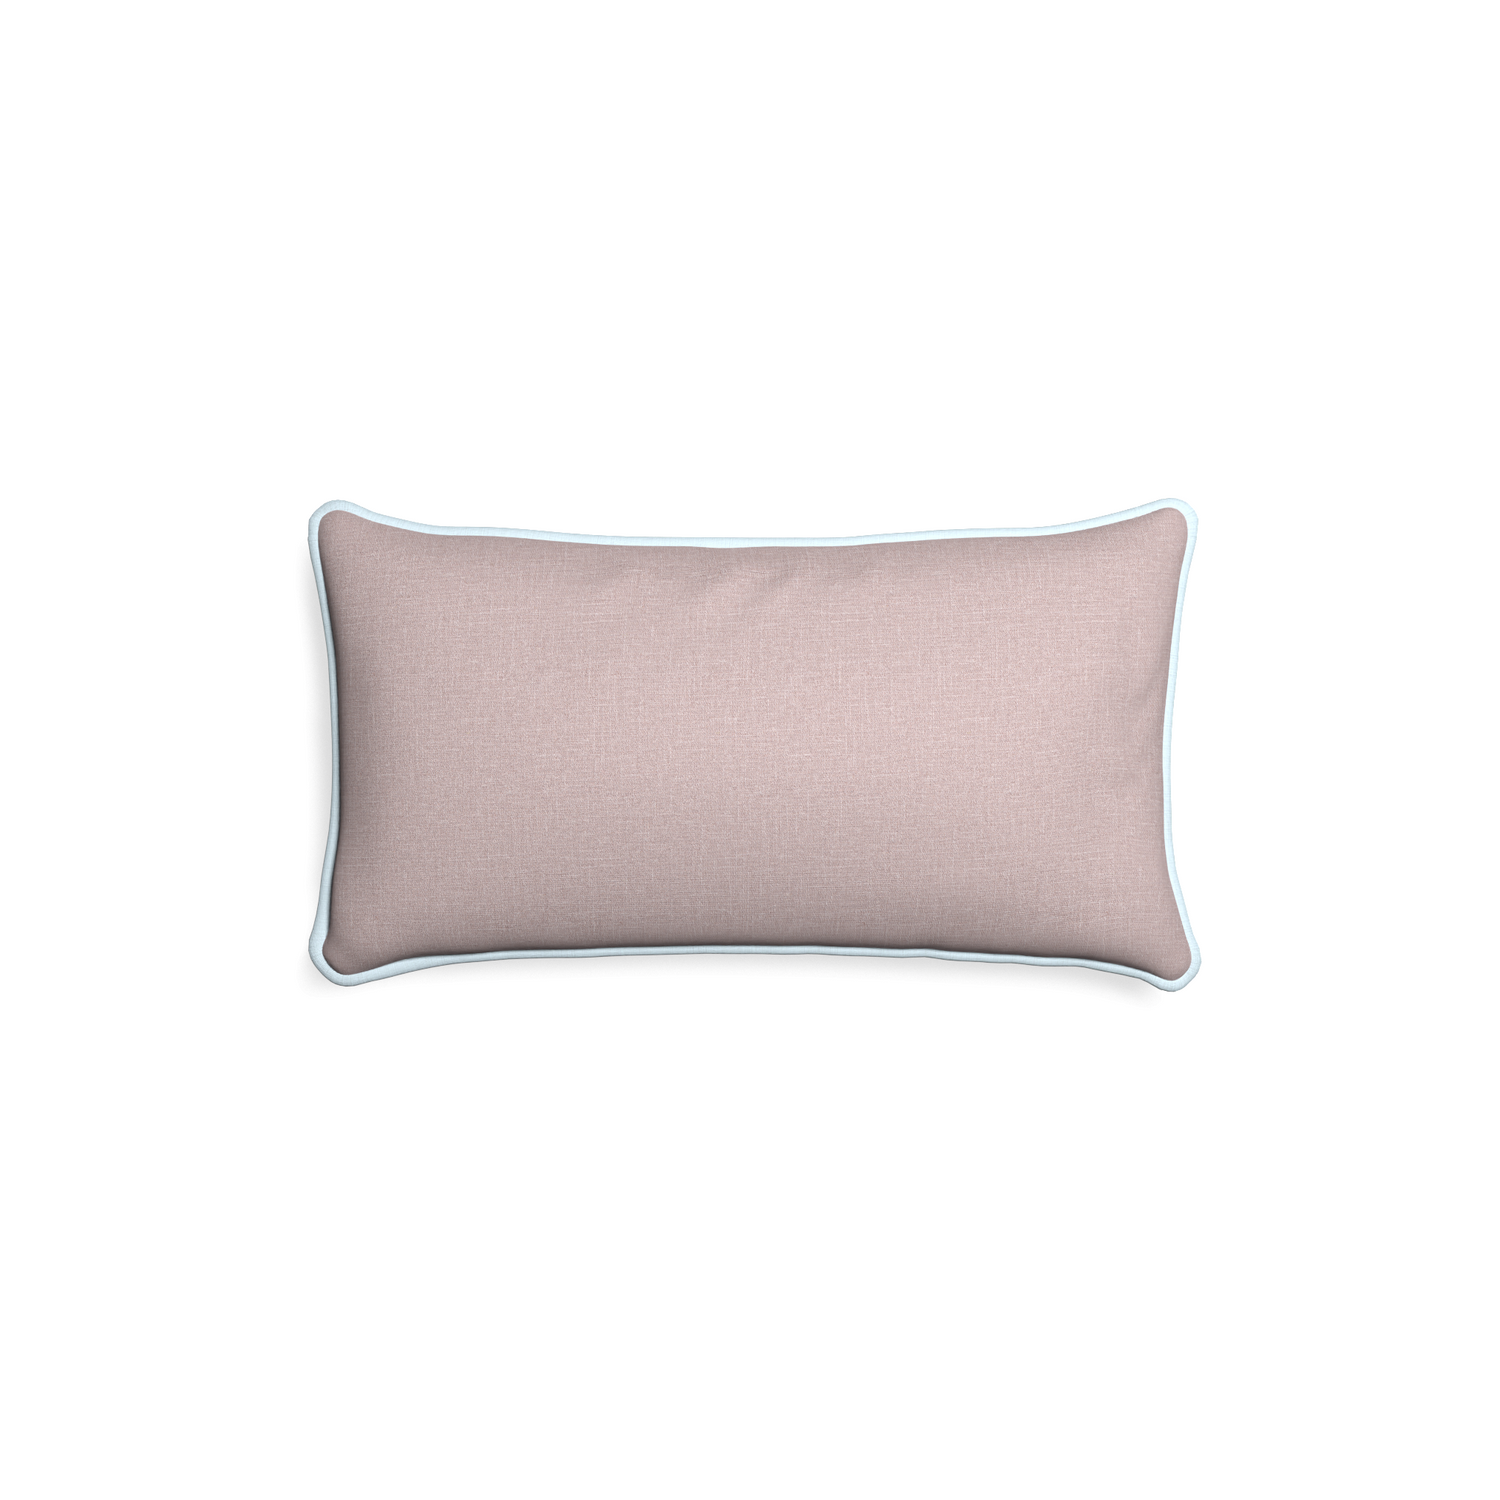 Petite-lumbar orchid custom mauve pinkpillow with powder piping on white background